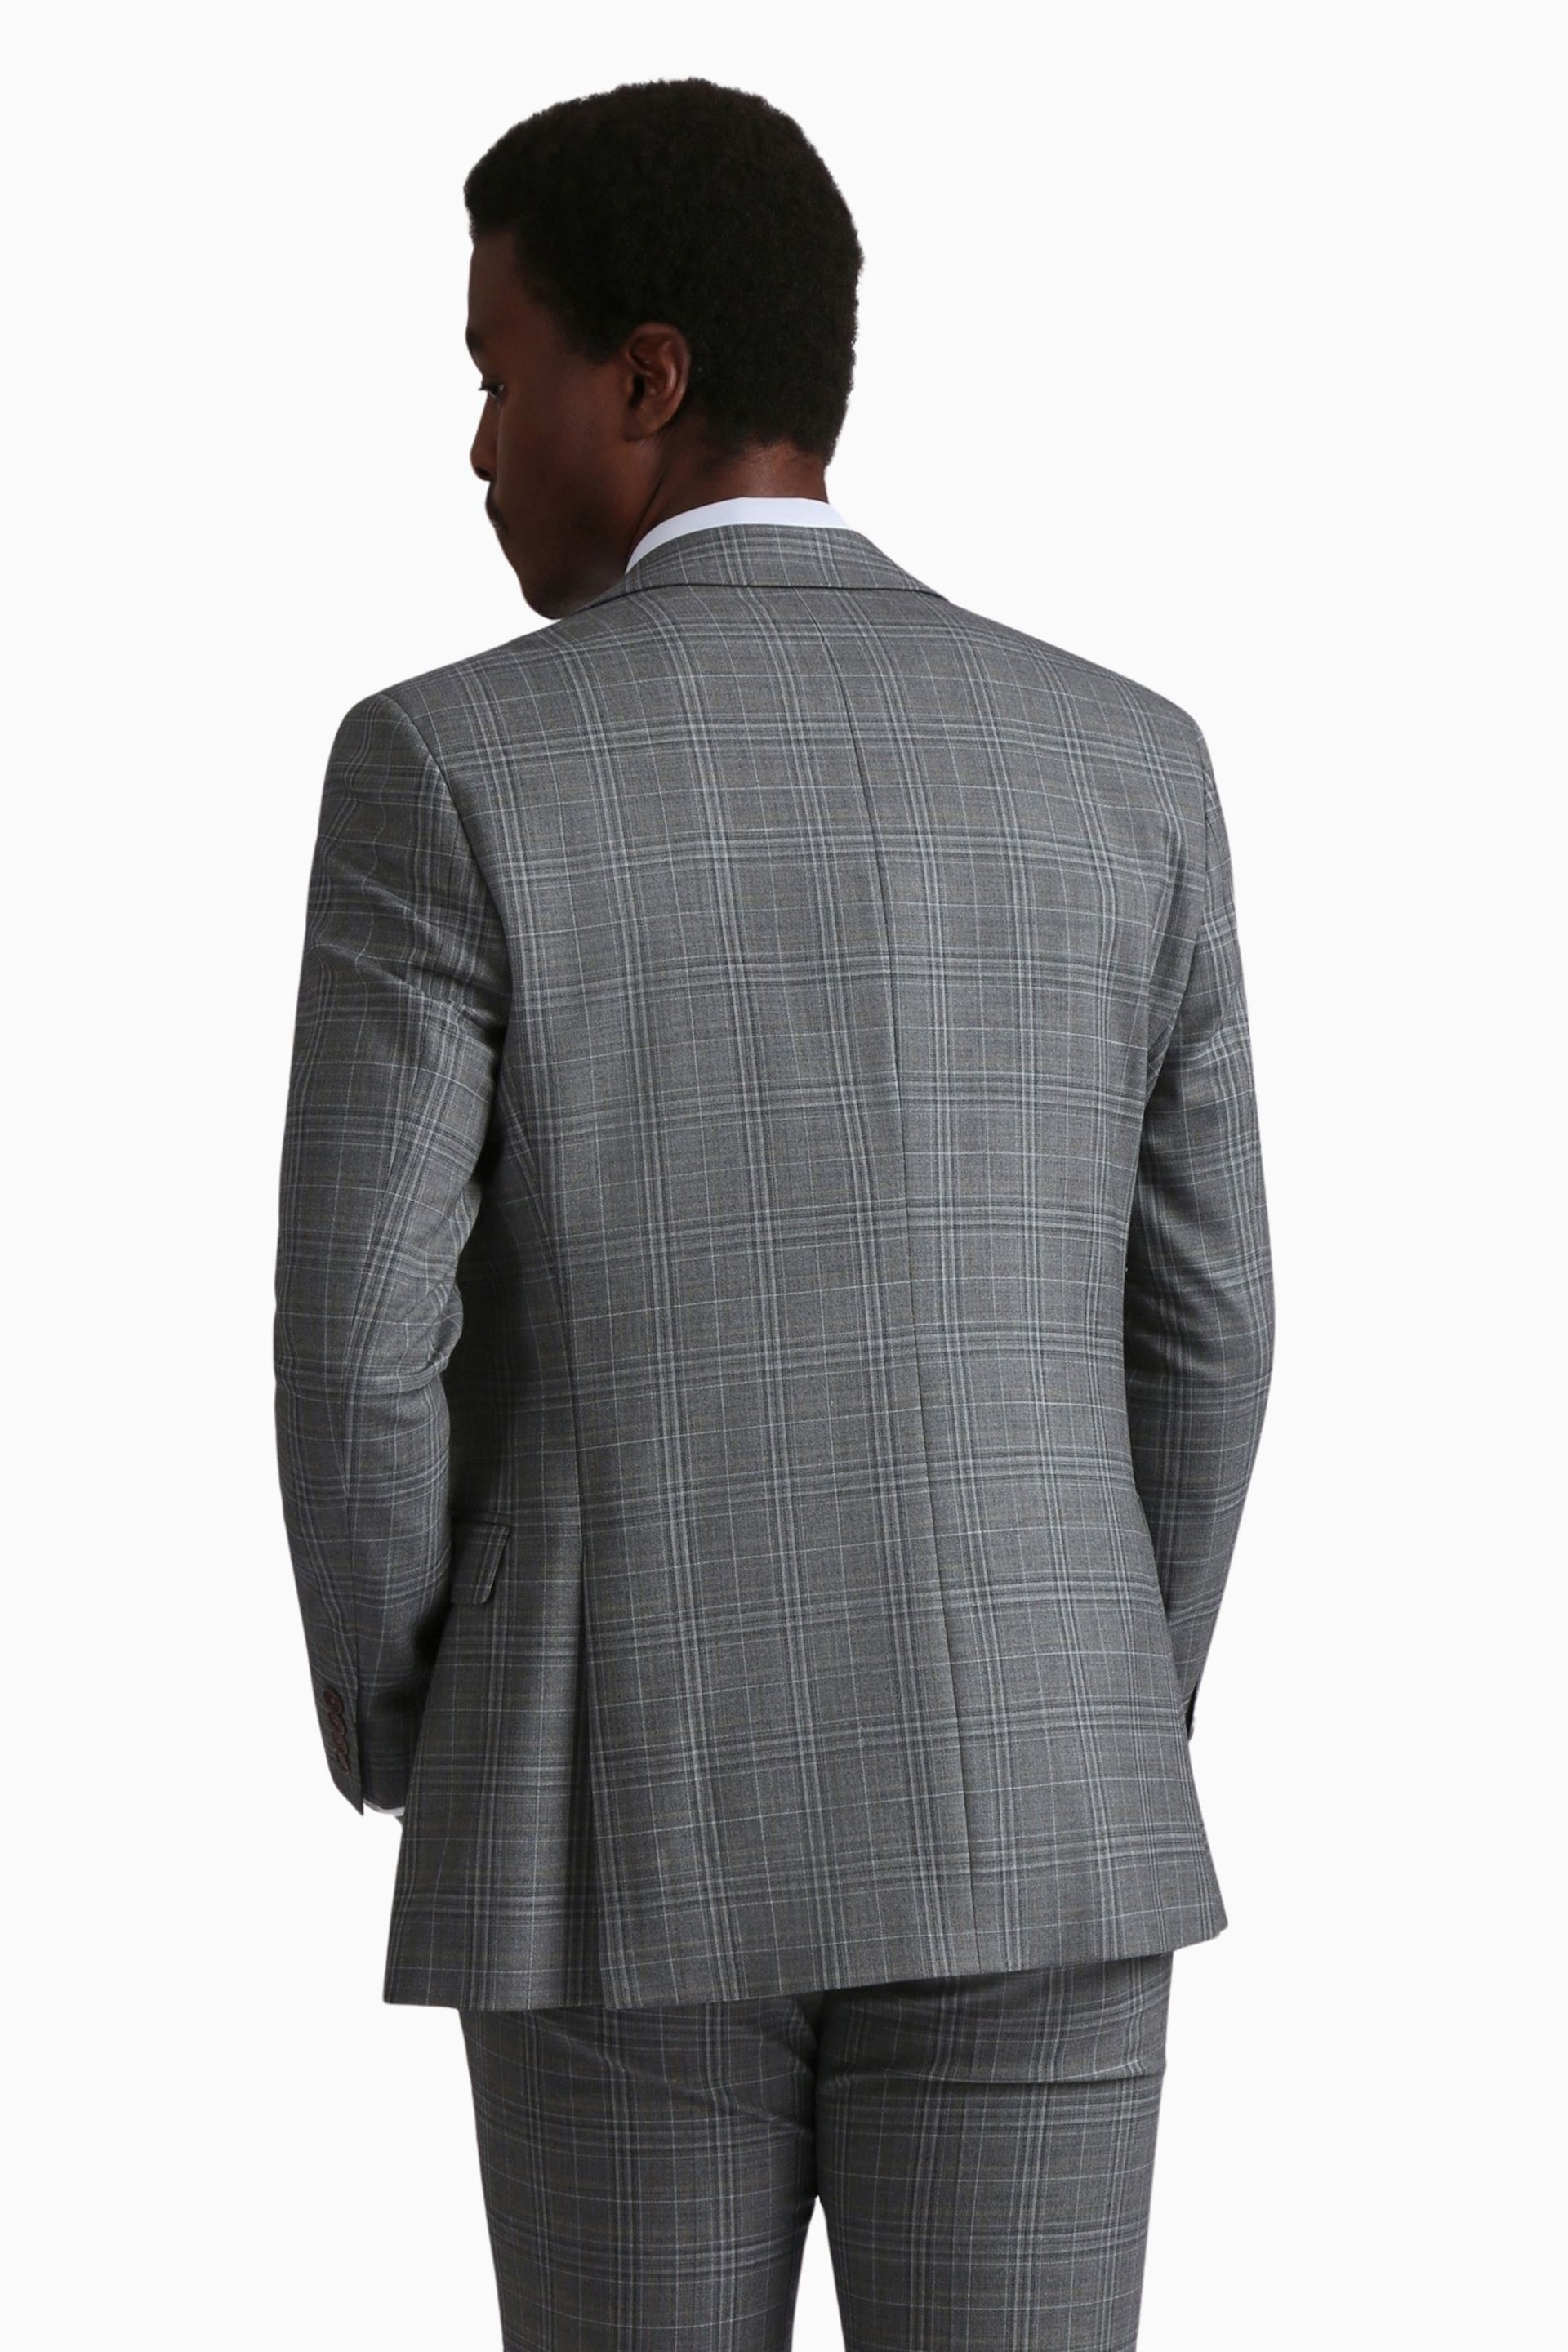 Ted Baker Tailoring Grey Miken Slim Fit Check Jacket - Image 2 of 5